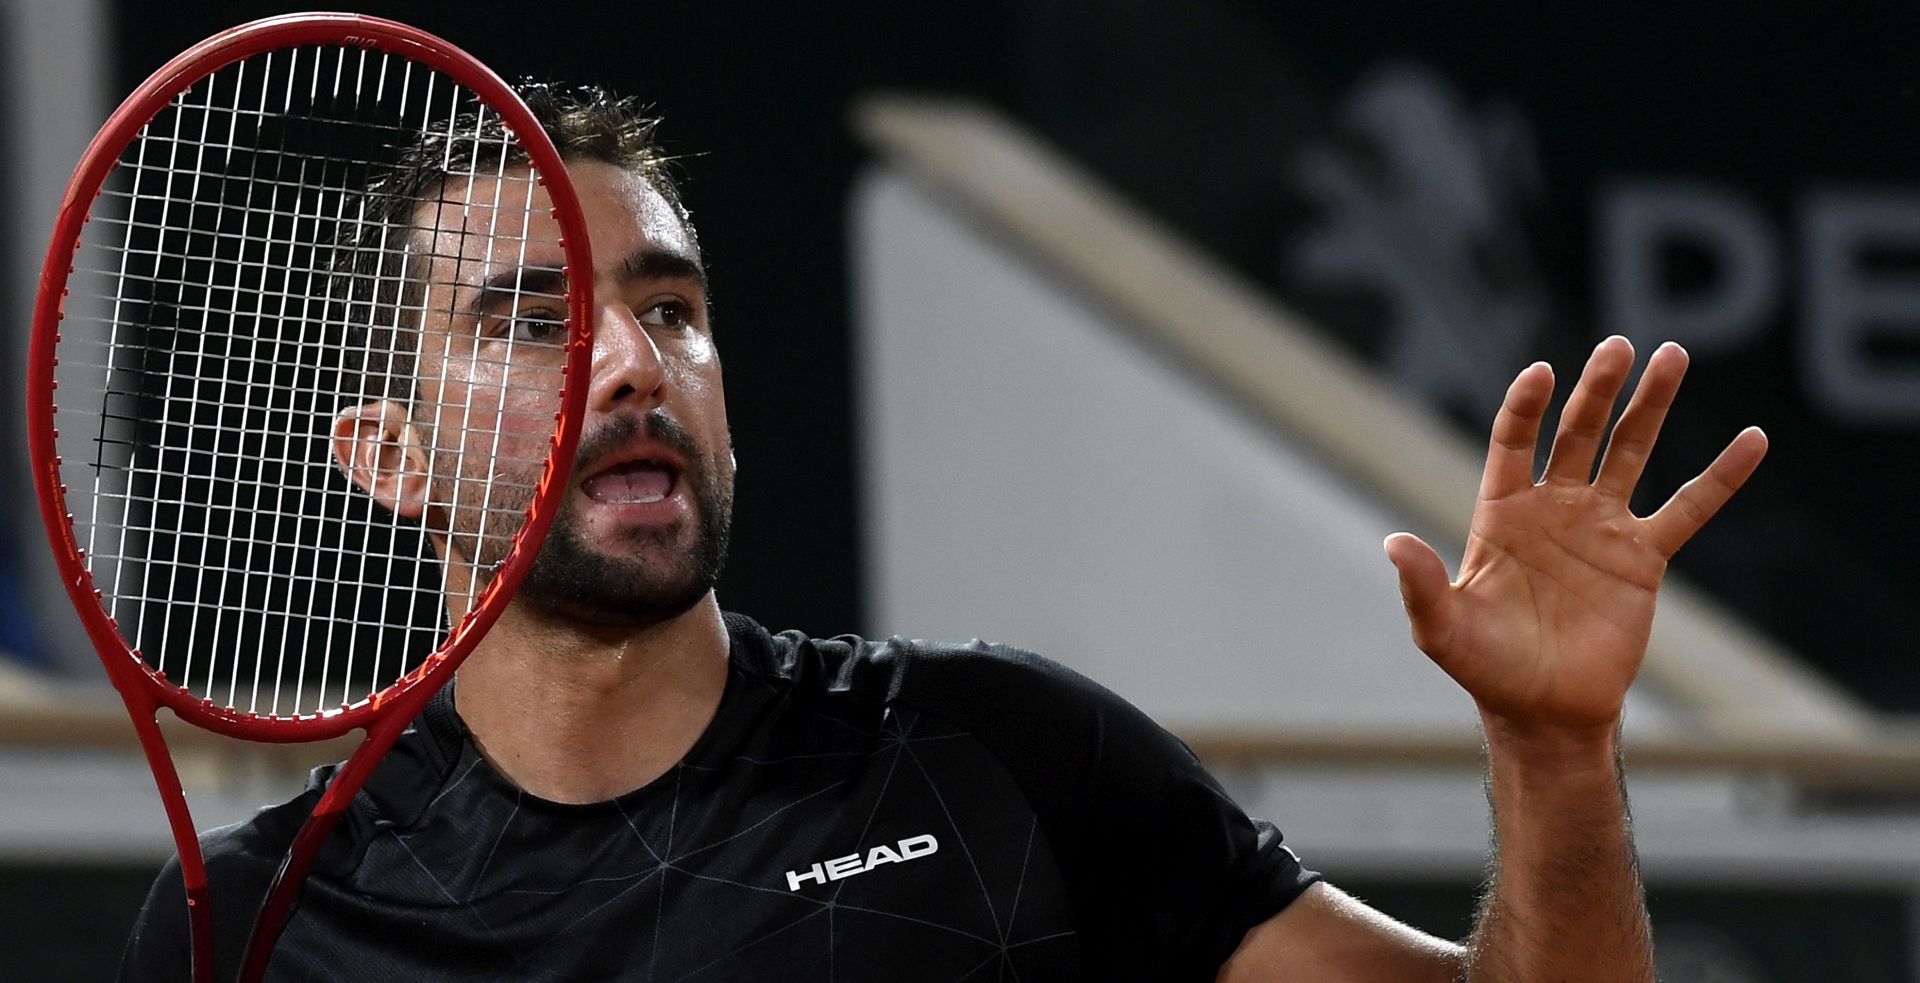 epa08703450 Marin Cilic of Croatia reacts as he plays  Dominic Thiem of Austria during their men’s first round match during the French Open tennis tournament at Roland ​Garros in Paris, France, 28 September 2020.  EPA/JULIEN DE ROSA